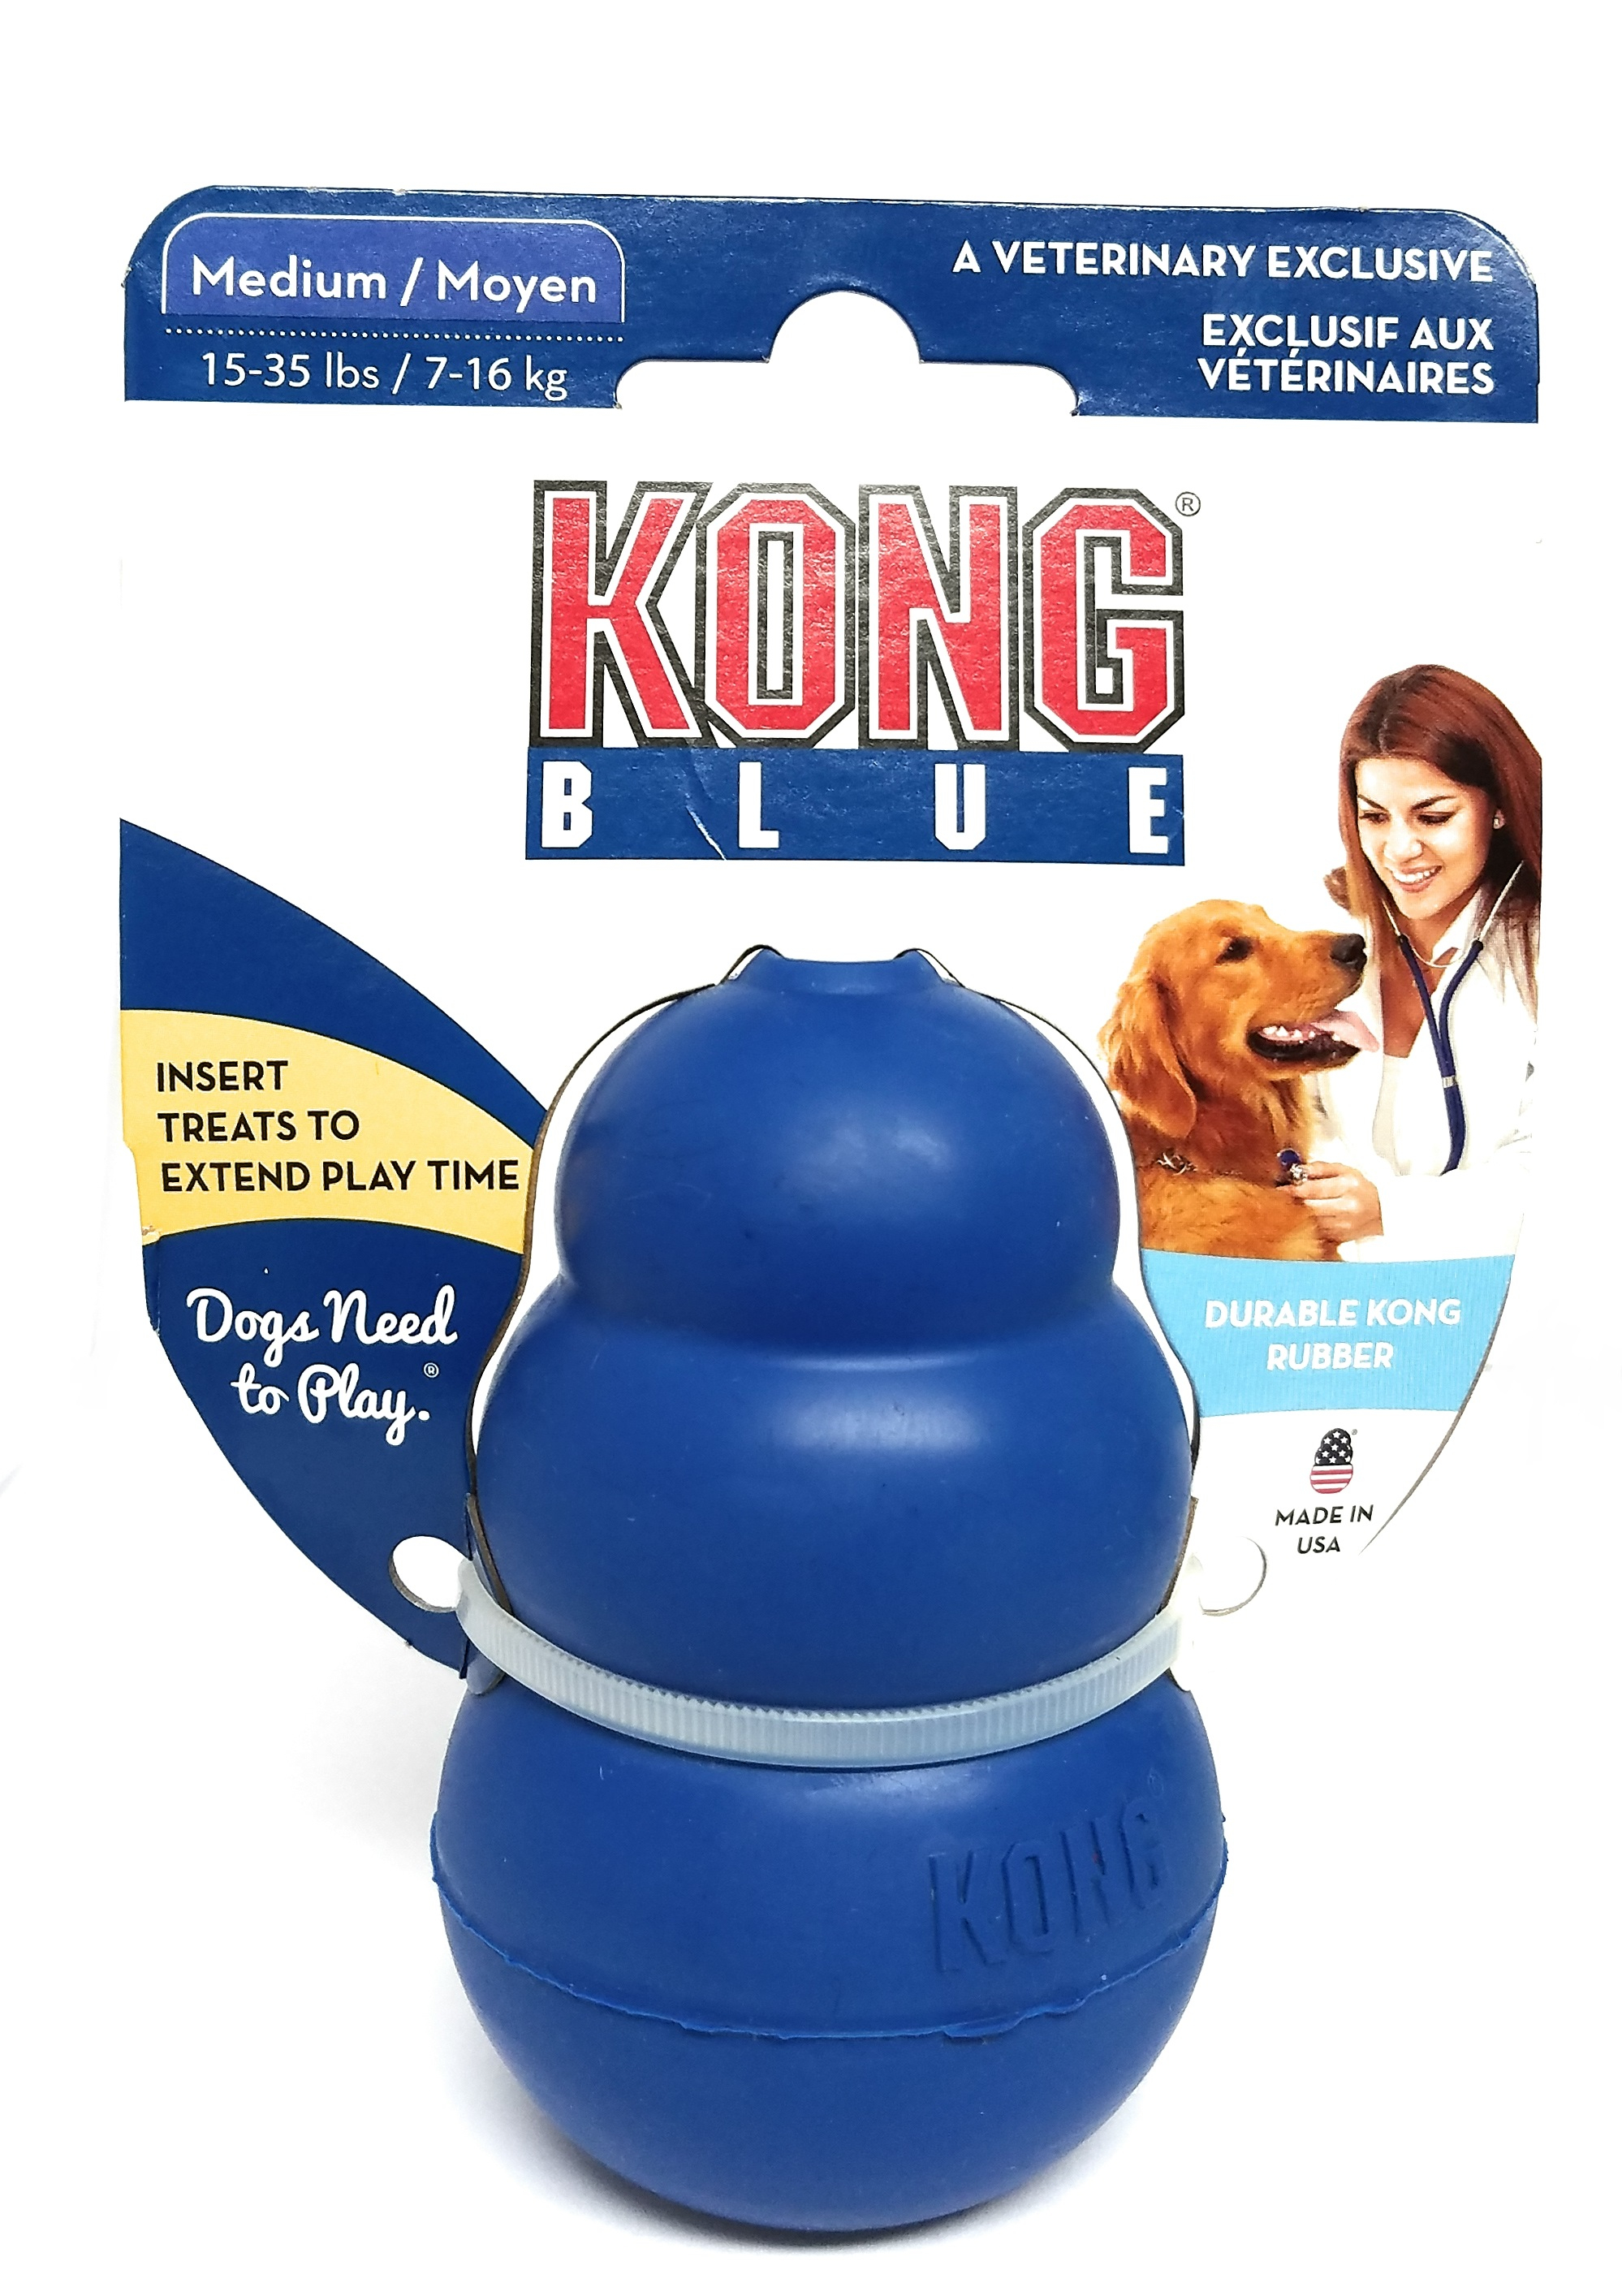 Kong Blue Is Made Of Radiopaque Rubber